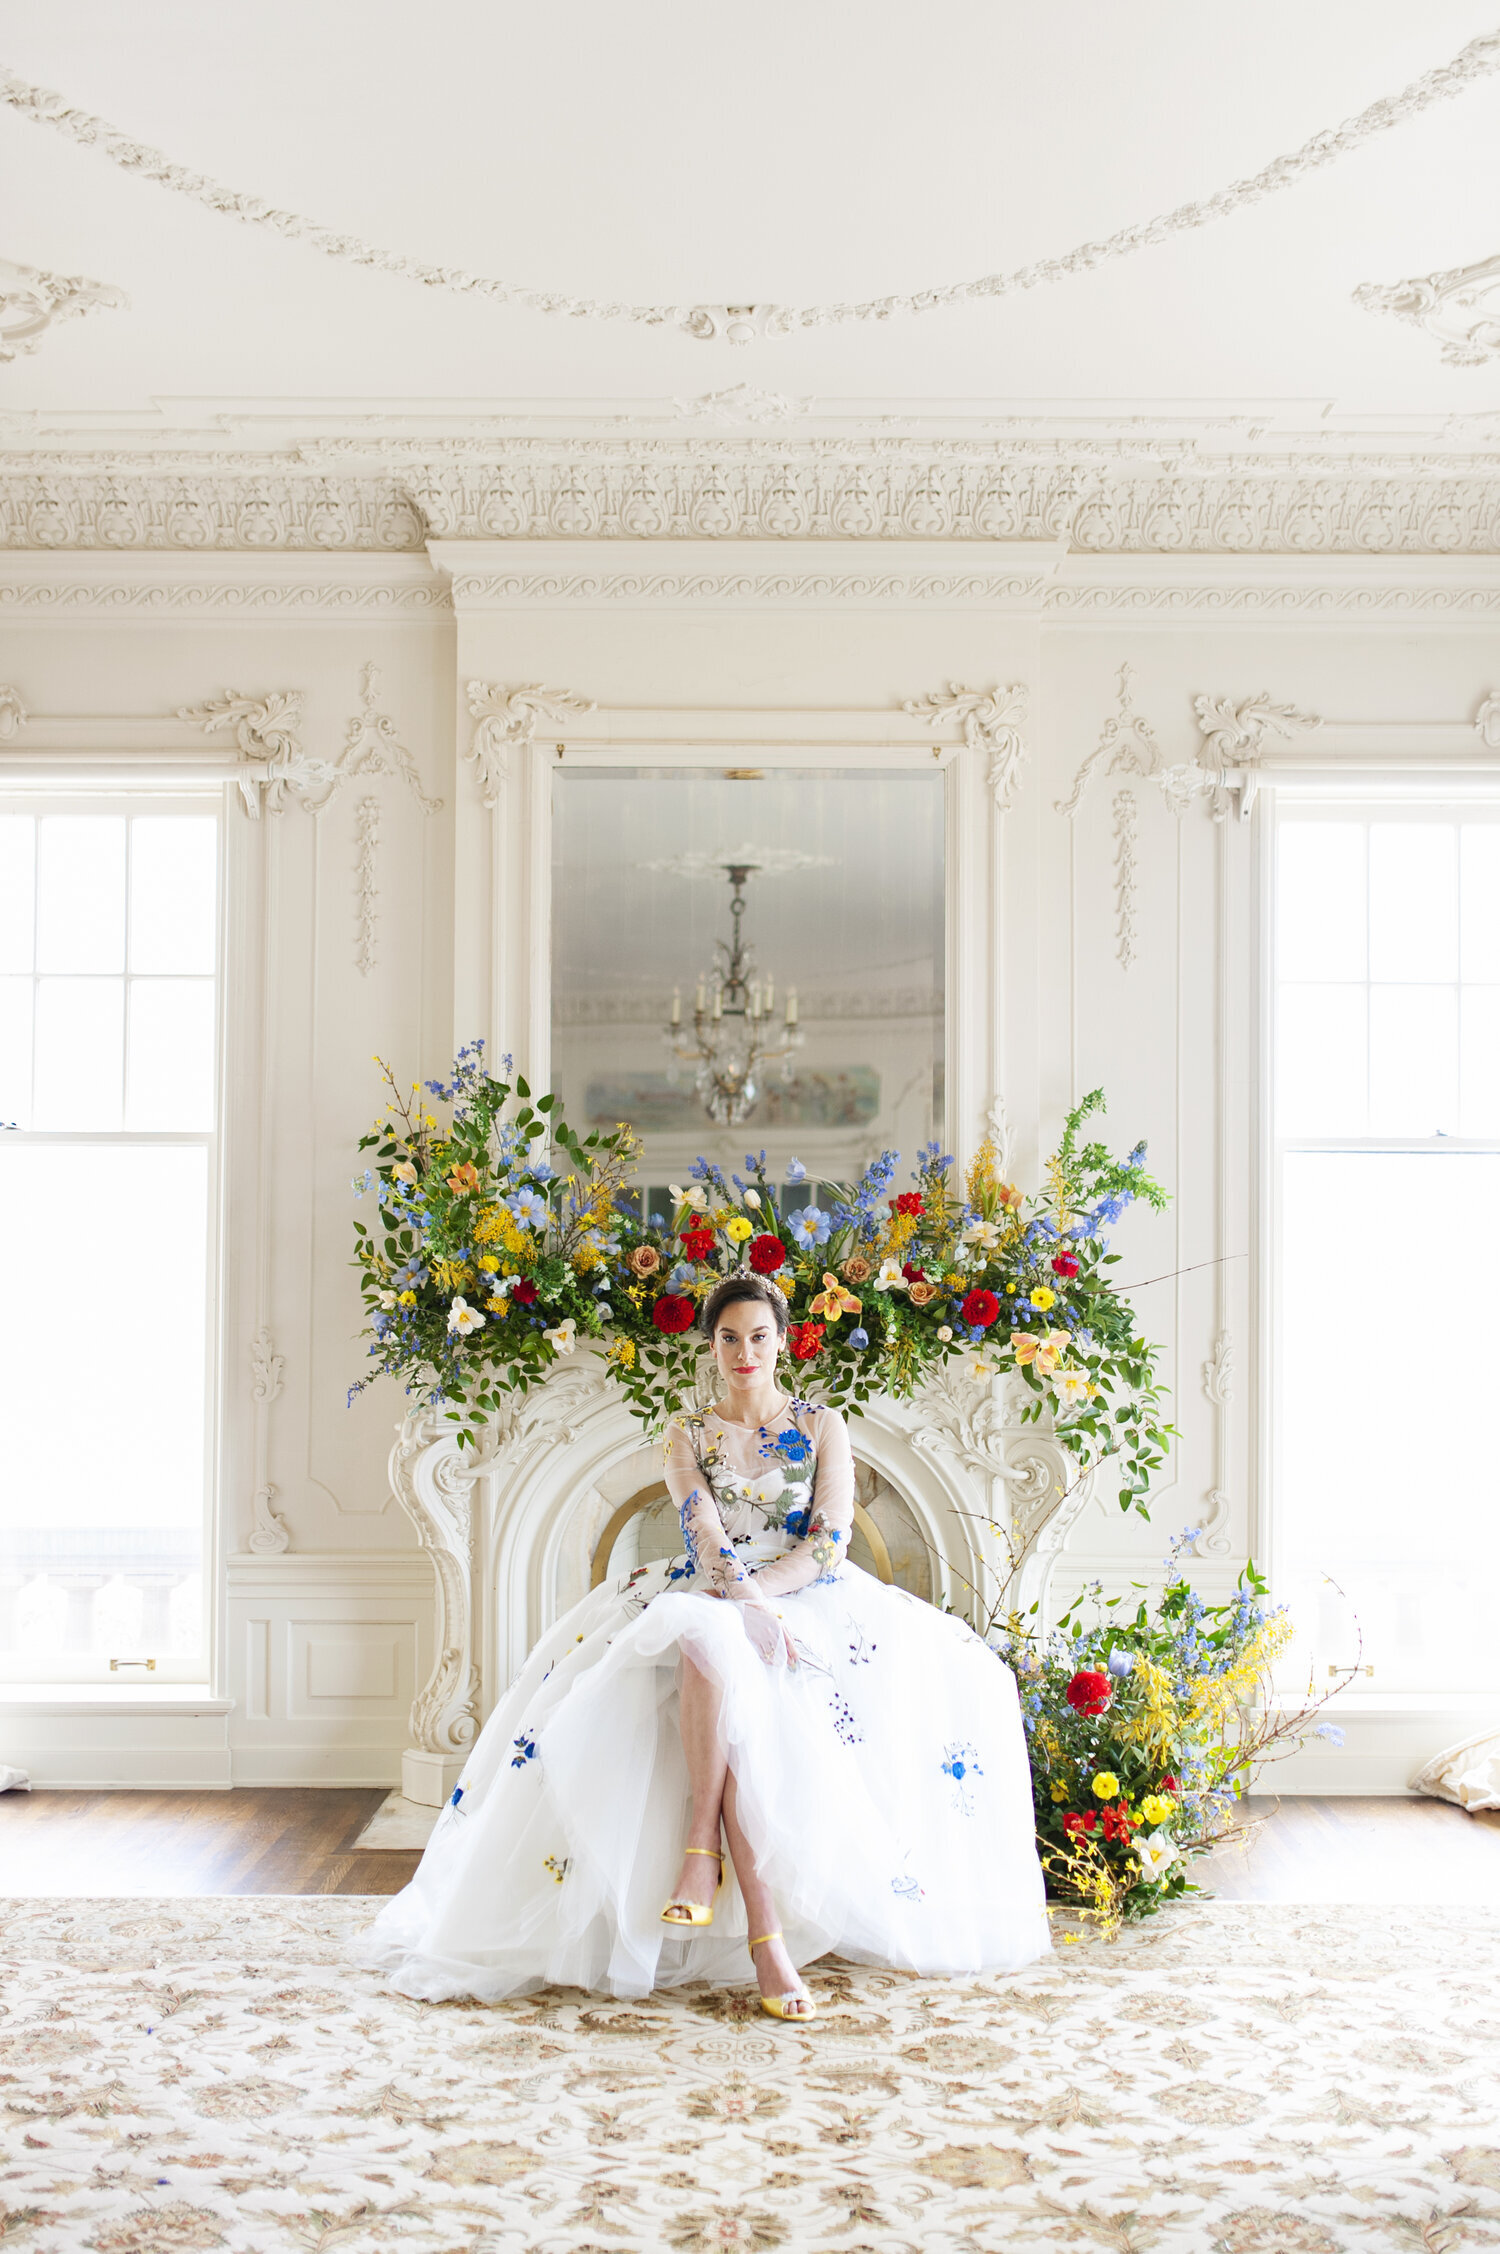 Styled Shoot by Ely Fair Photography. Mobile Image